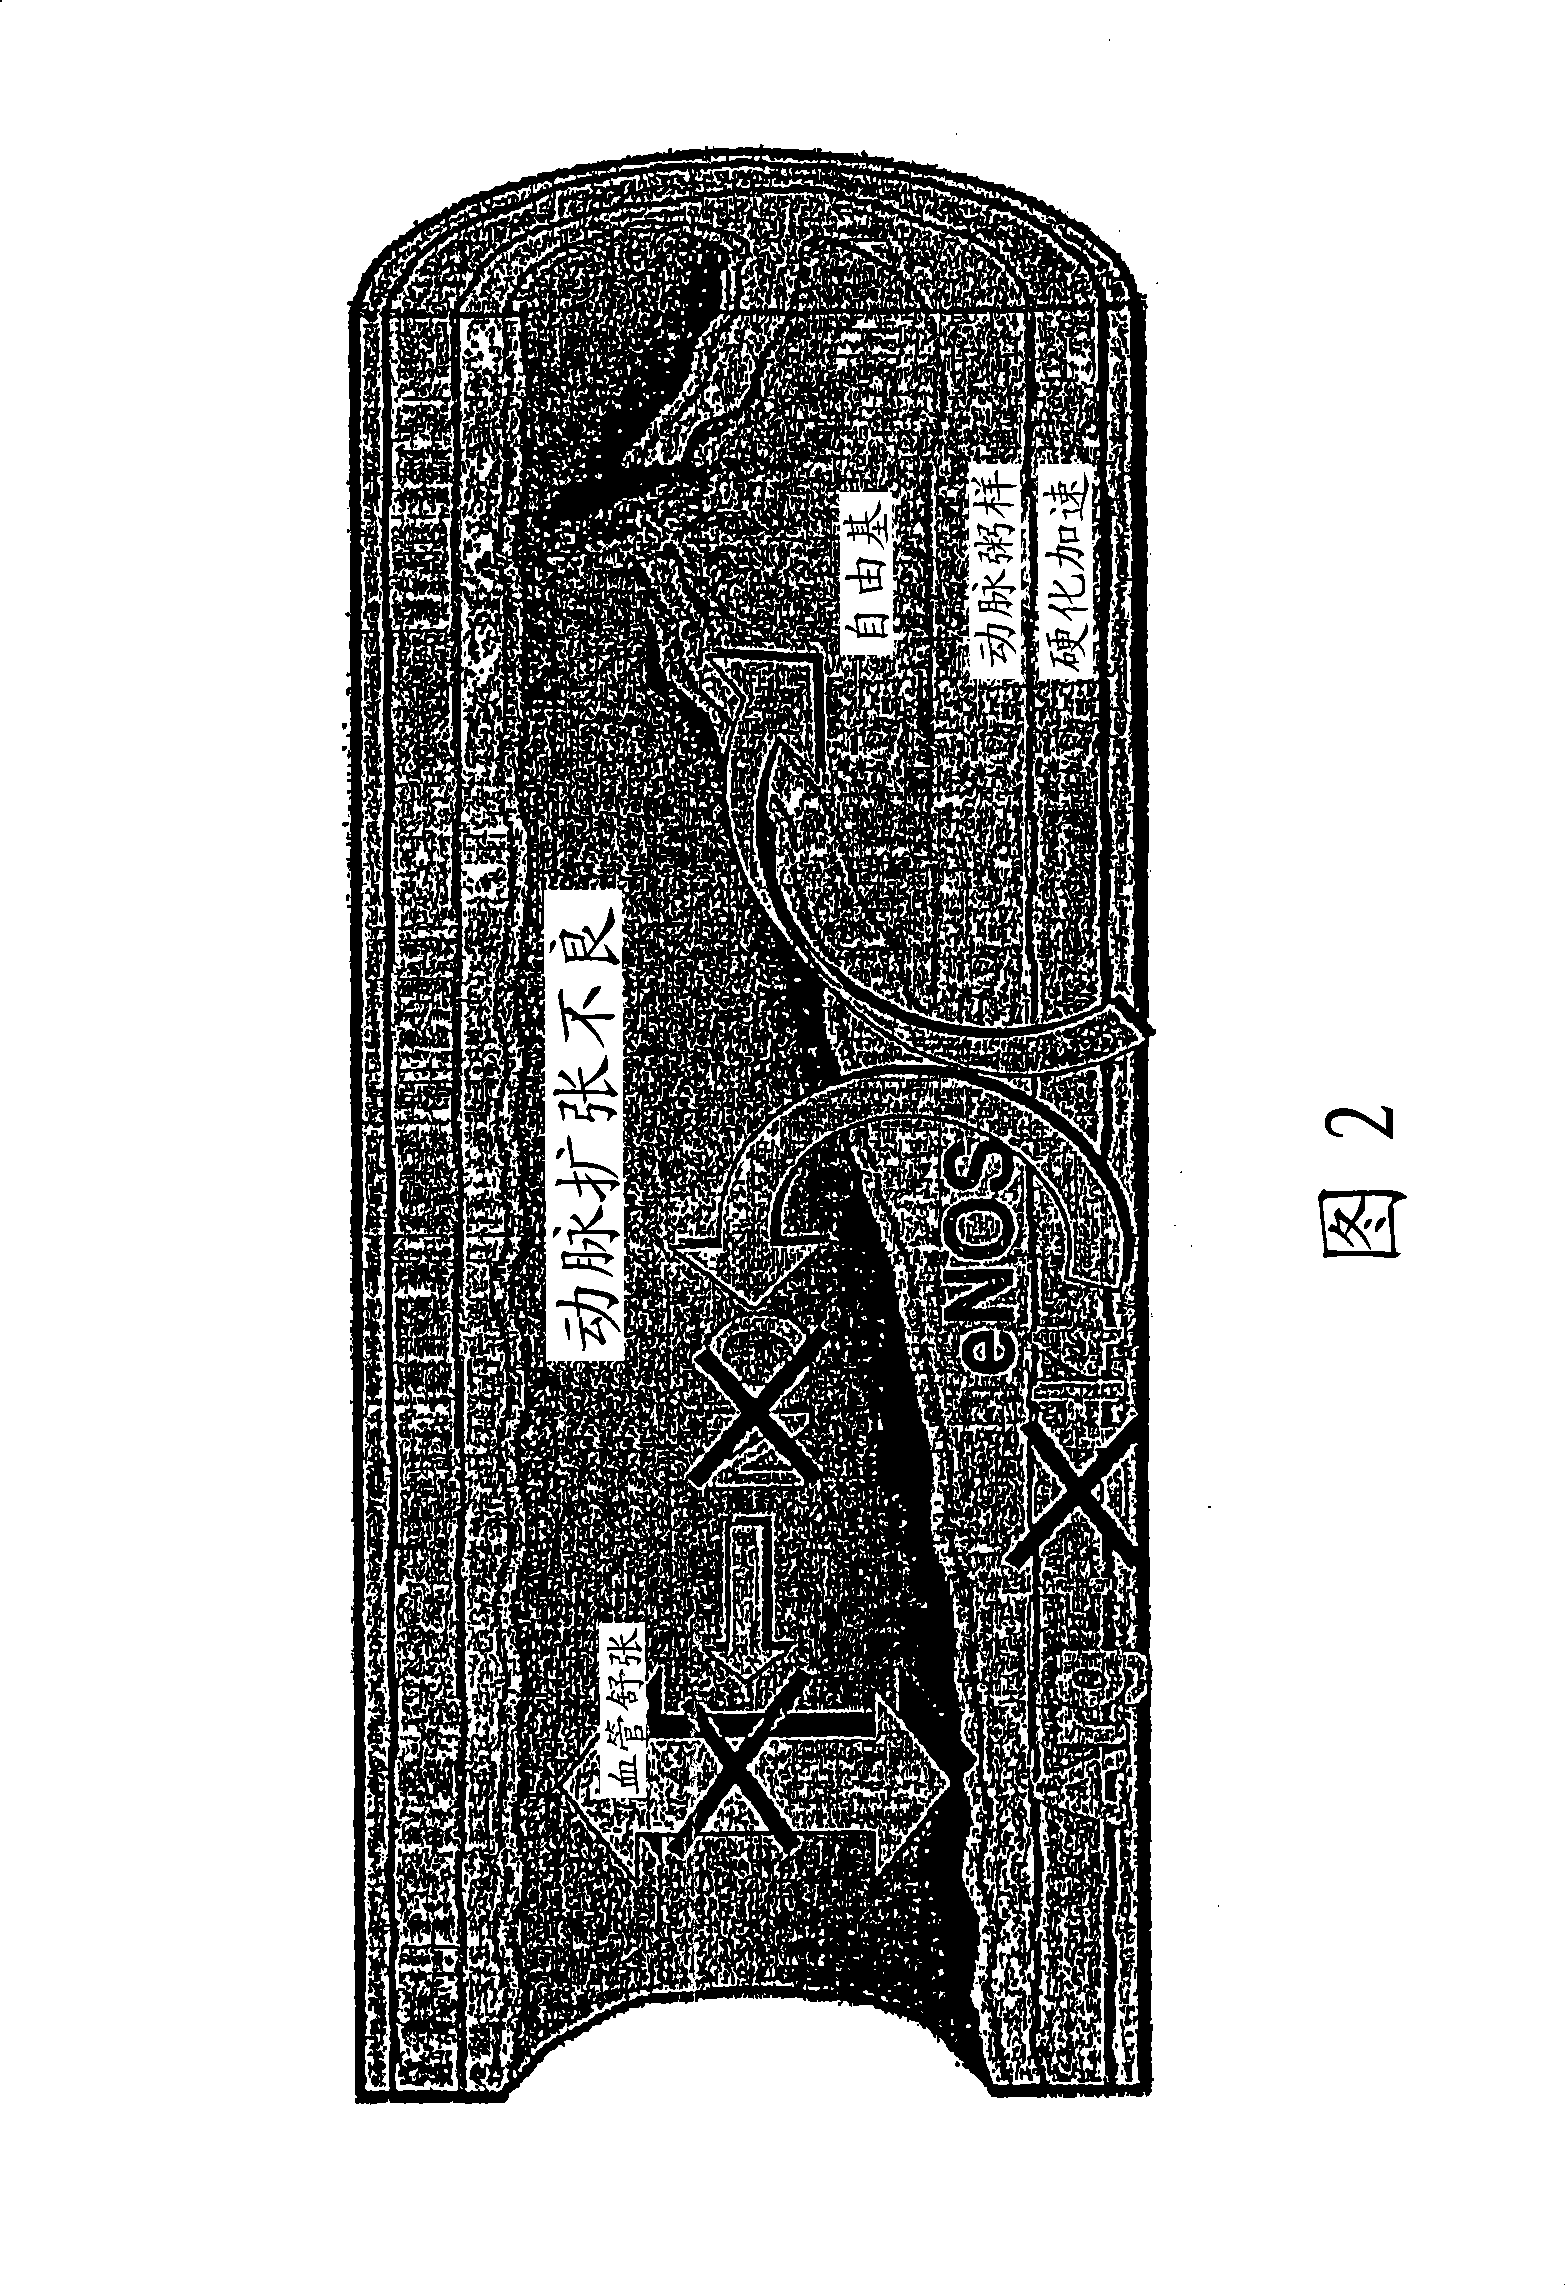 Methods and compositions for the treatment of vascular disease